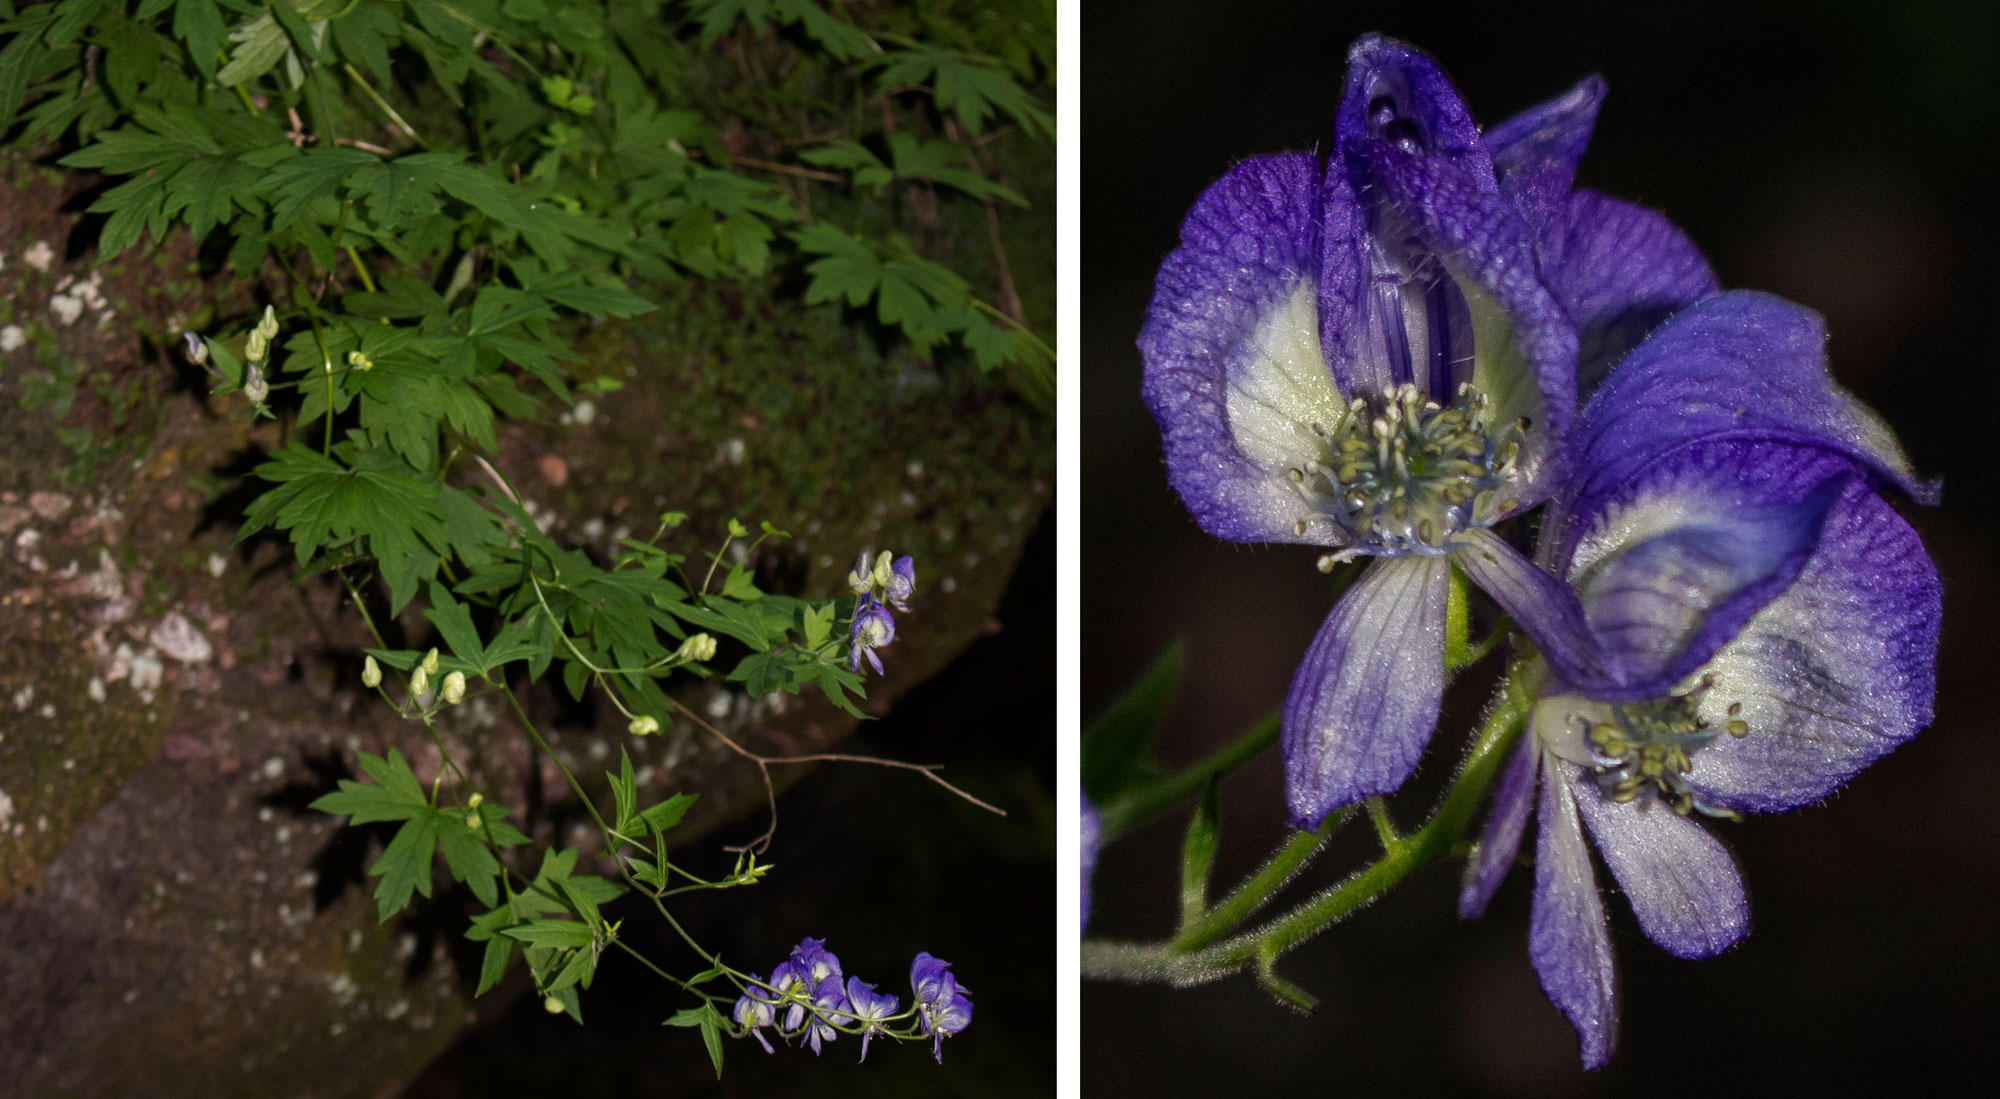 2-panel figure of photos of northern monkshood, a flowering plant, in Wisconsin. Panel 1: Photo of northern monkshood hanging from a rock outcropping. The photo shows a herbaceous plant with palmately lobed green leaves and purple flowers. Panel 2: Photo of northern monkshood flowers. The photo shows two bilaterally symmetrical flowers with white and purple petals.